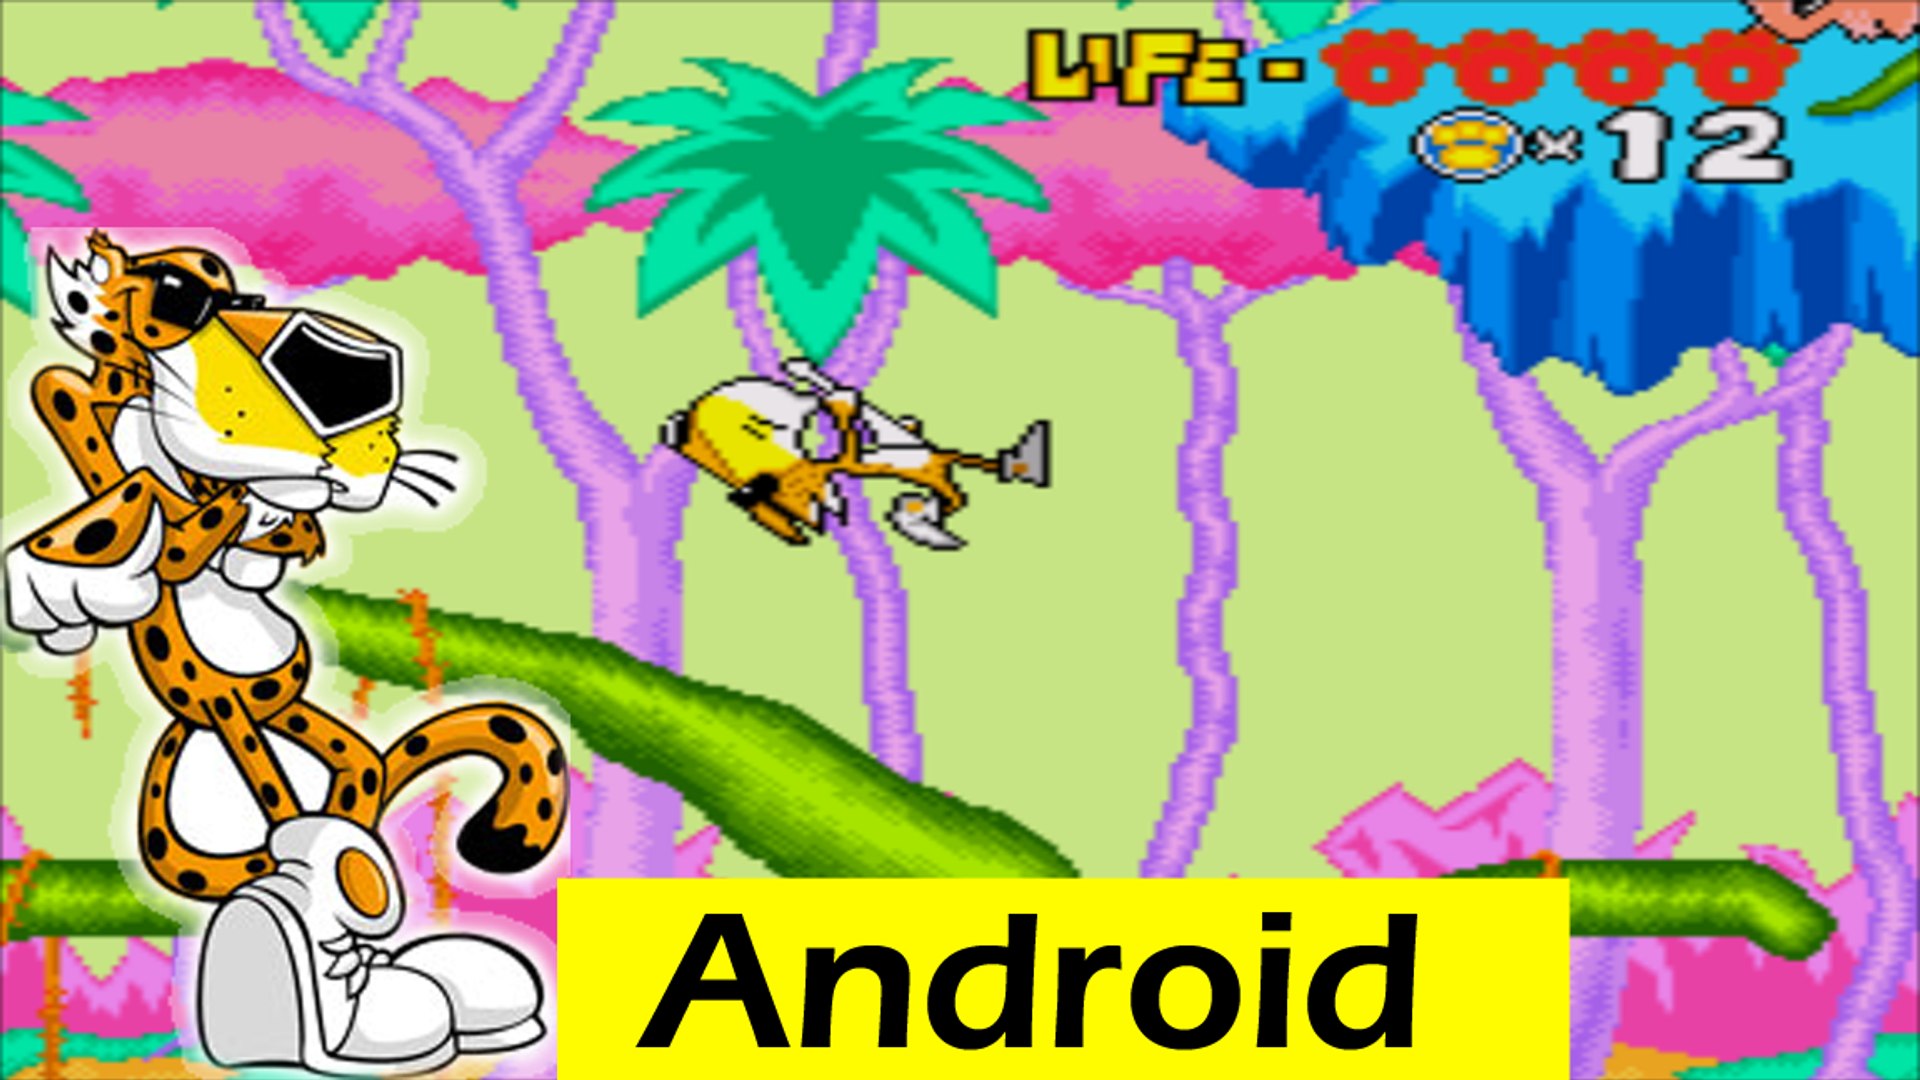 Chester Cheetah #02 To Android